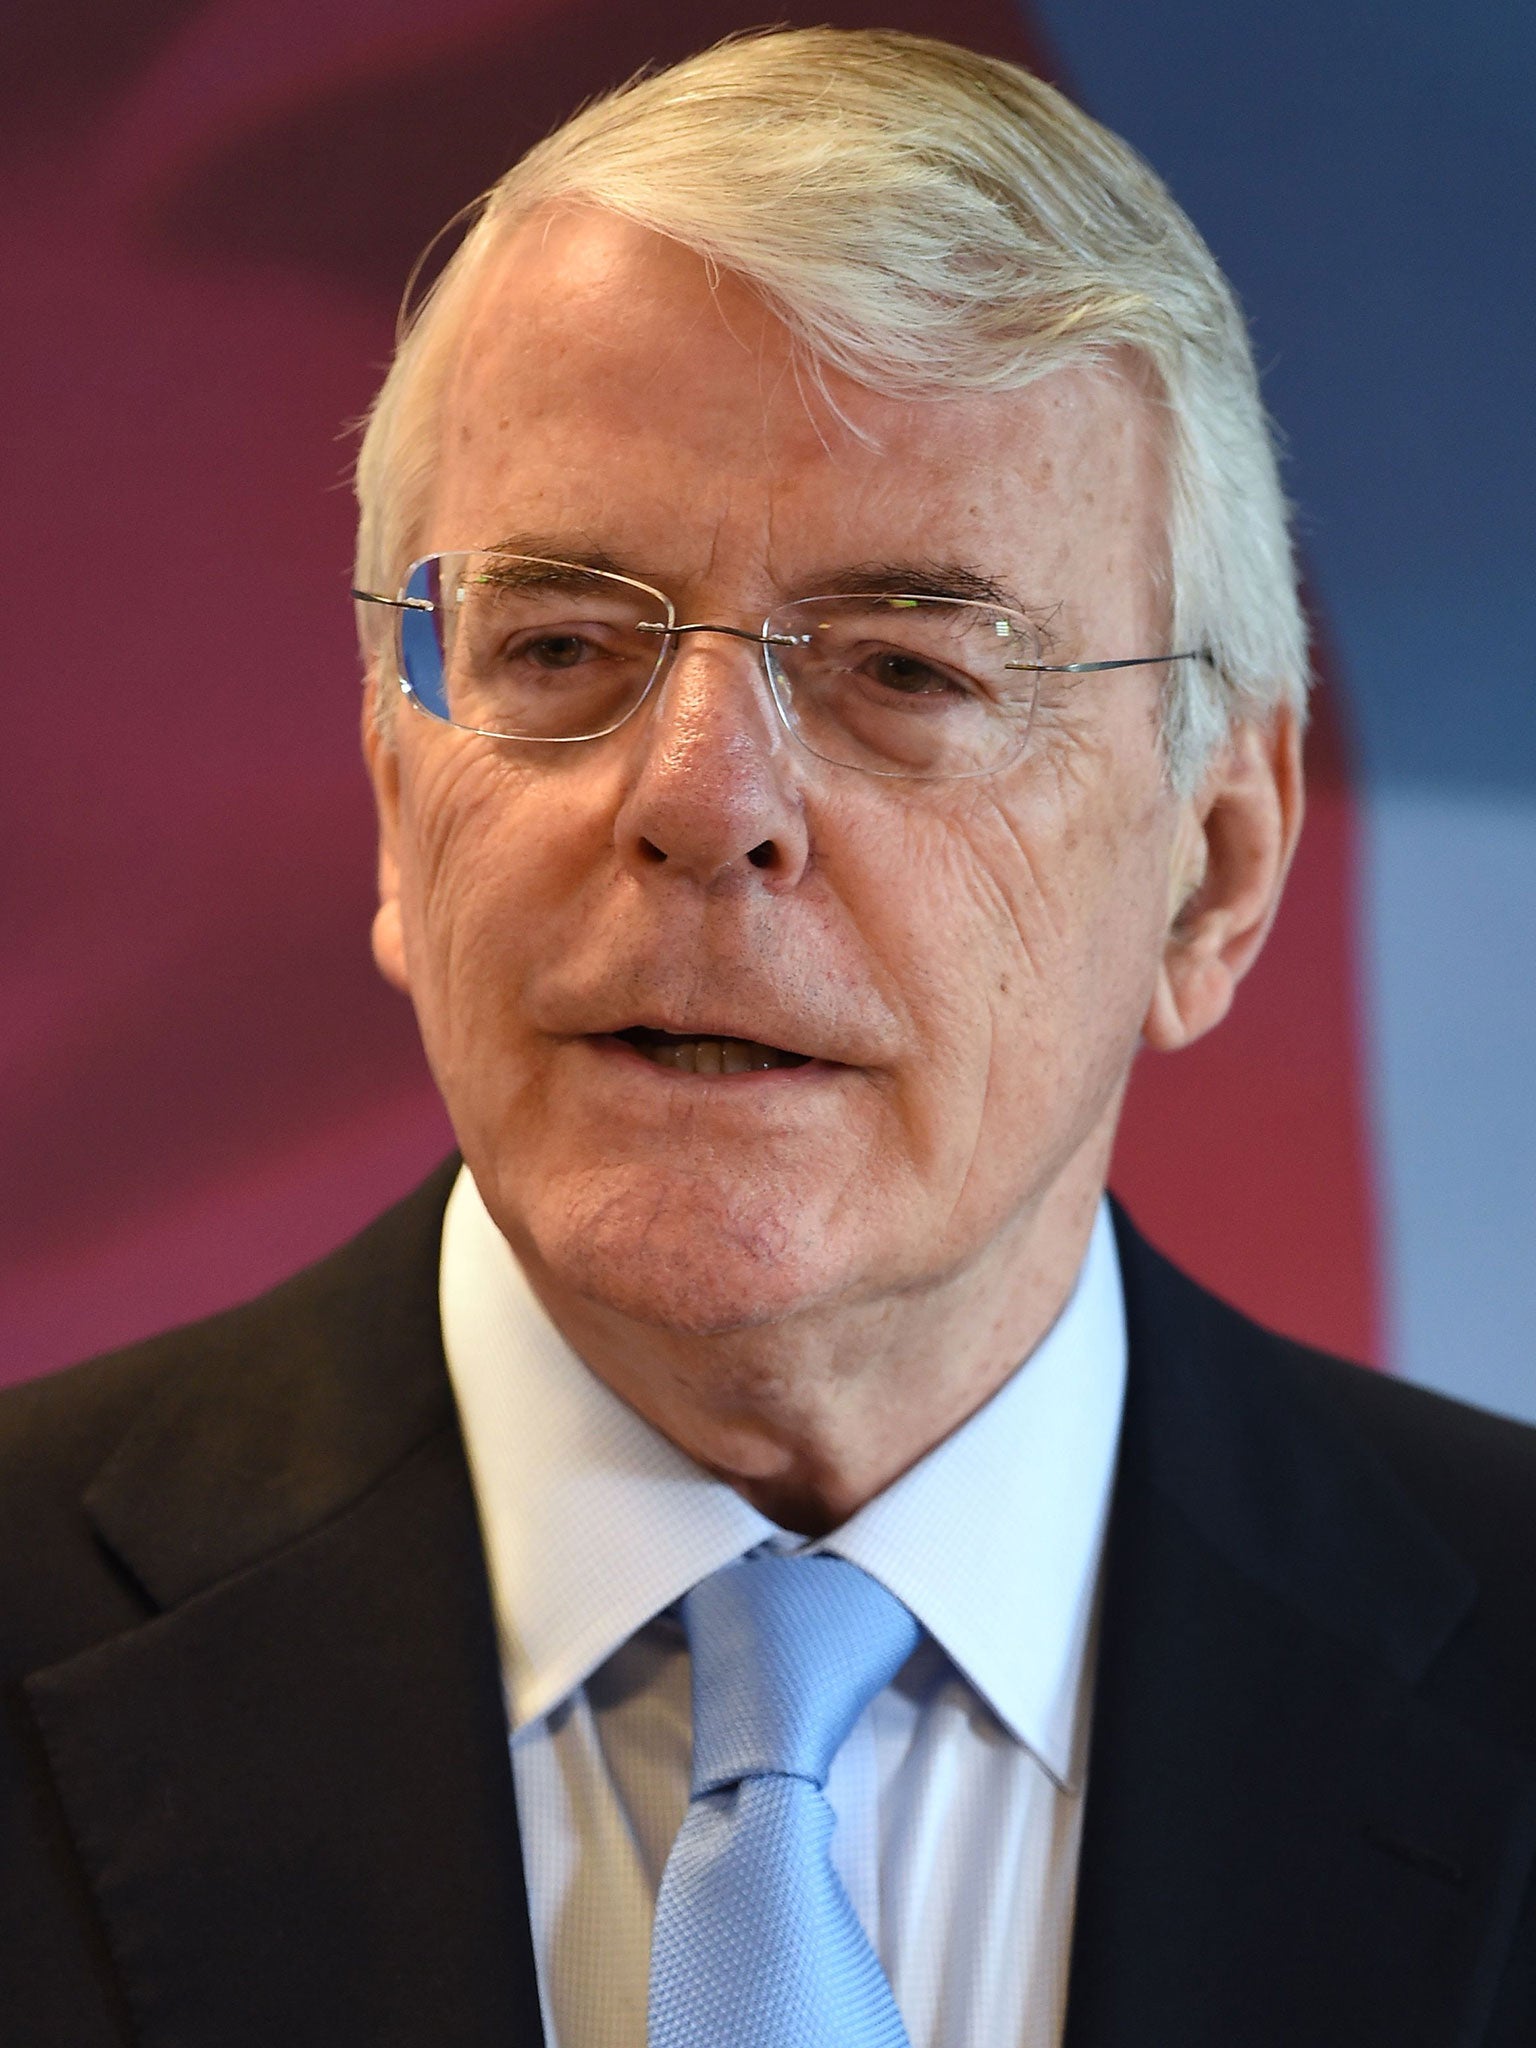 Former Prime Minister Sir John Major has warned that the pro-Brexit campaign is 'fuelling prejudice' by peddling dangerous falsehoods on immigration